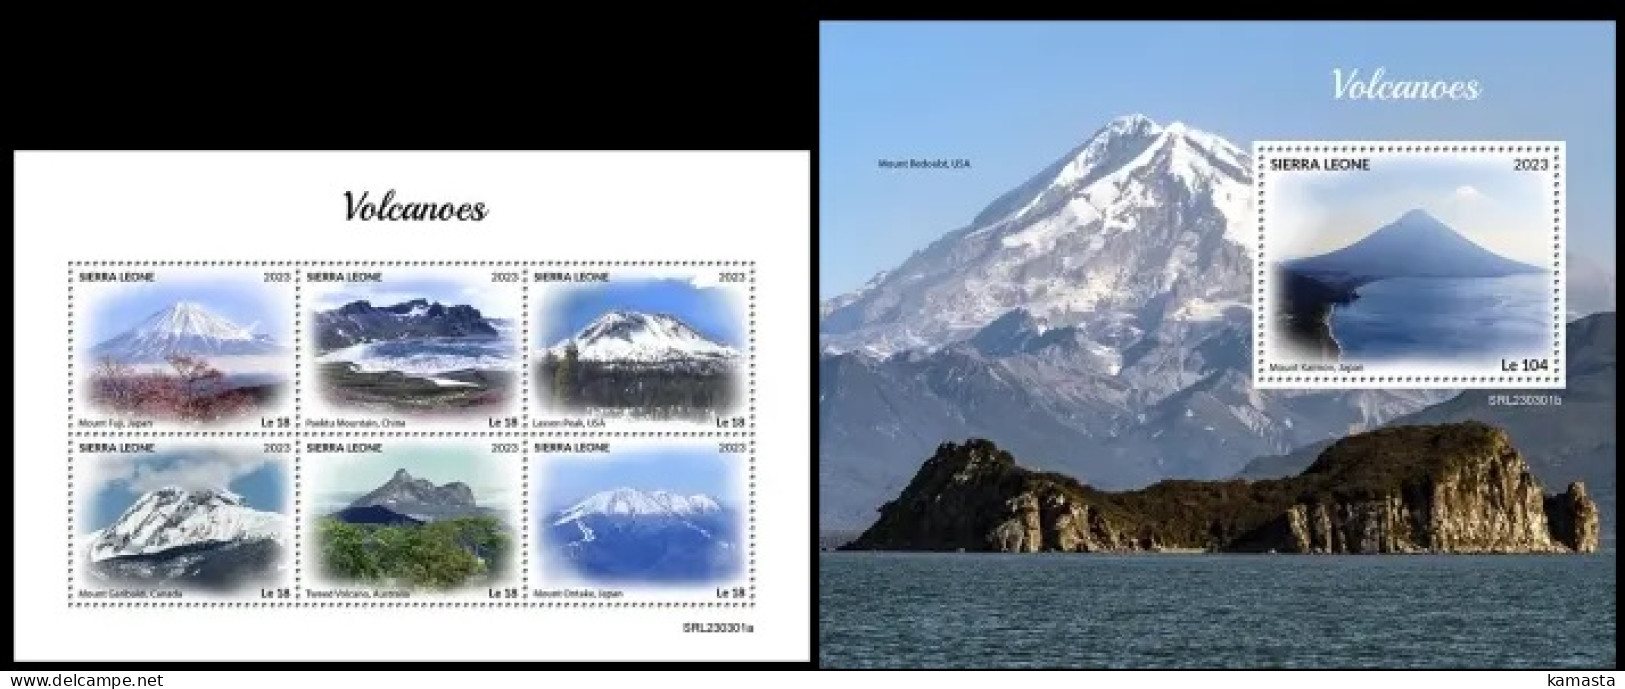 Sierra Leone  2023 Volcanoes. (301) OFFICIAL ISSUE - Volcanes